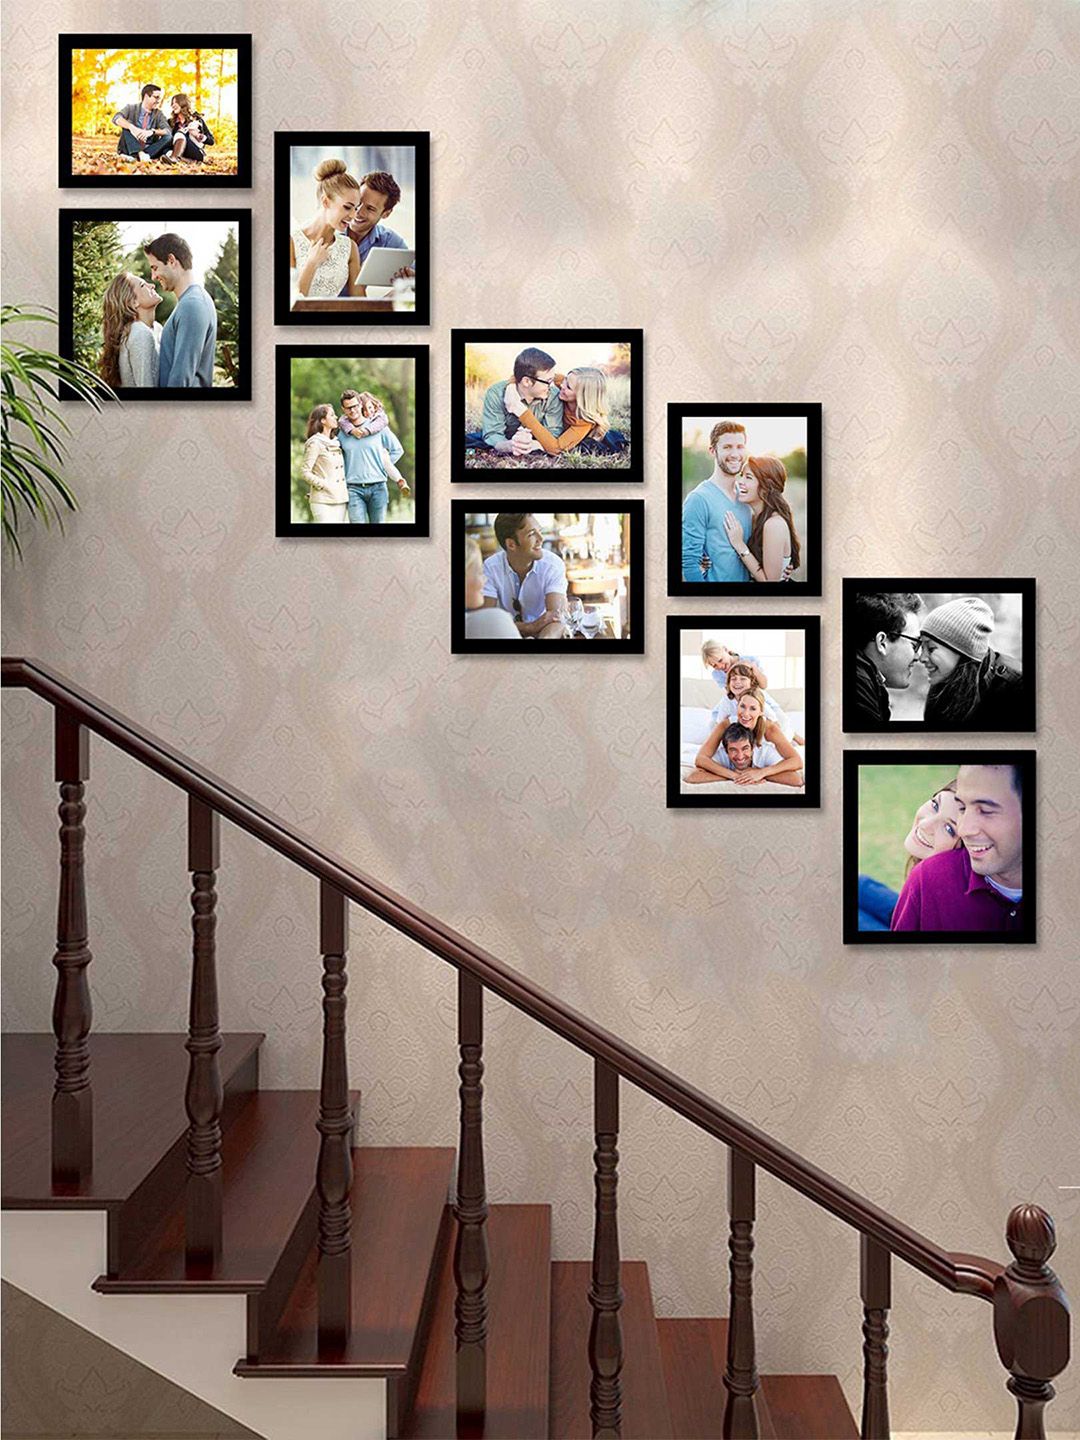 Art Street Set Of 10 Black Wall Photo Frames Price in India